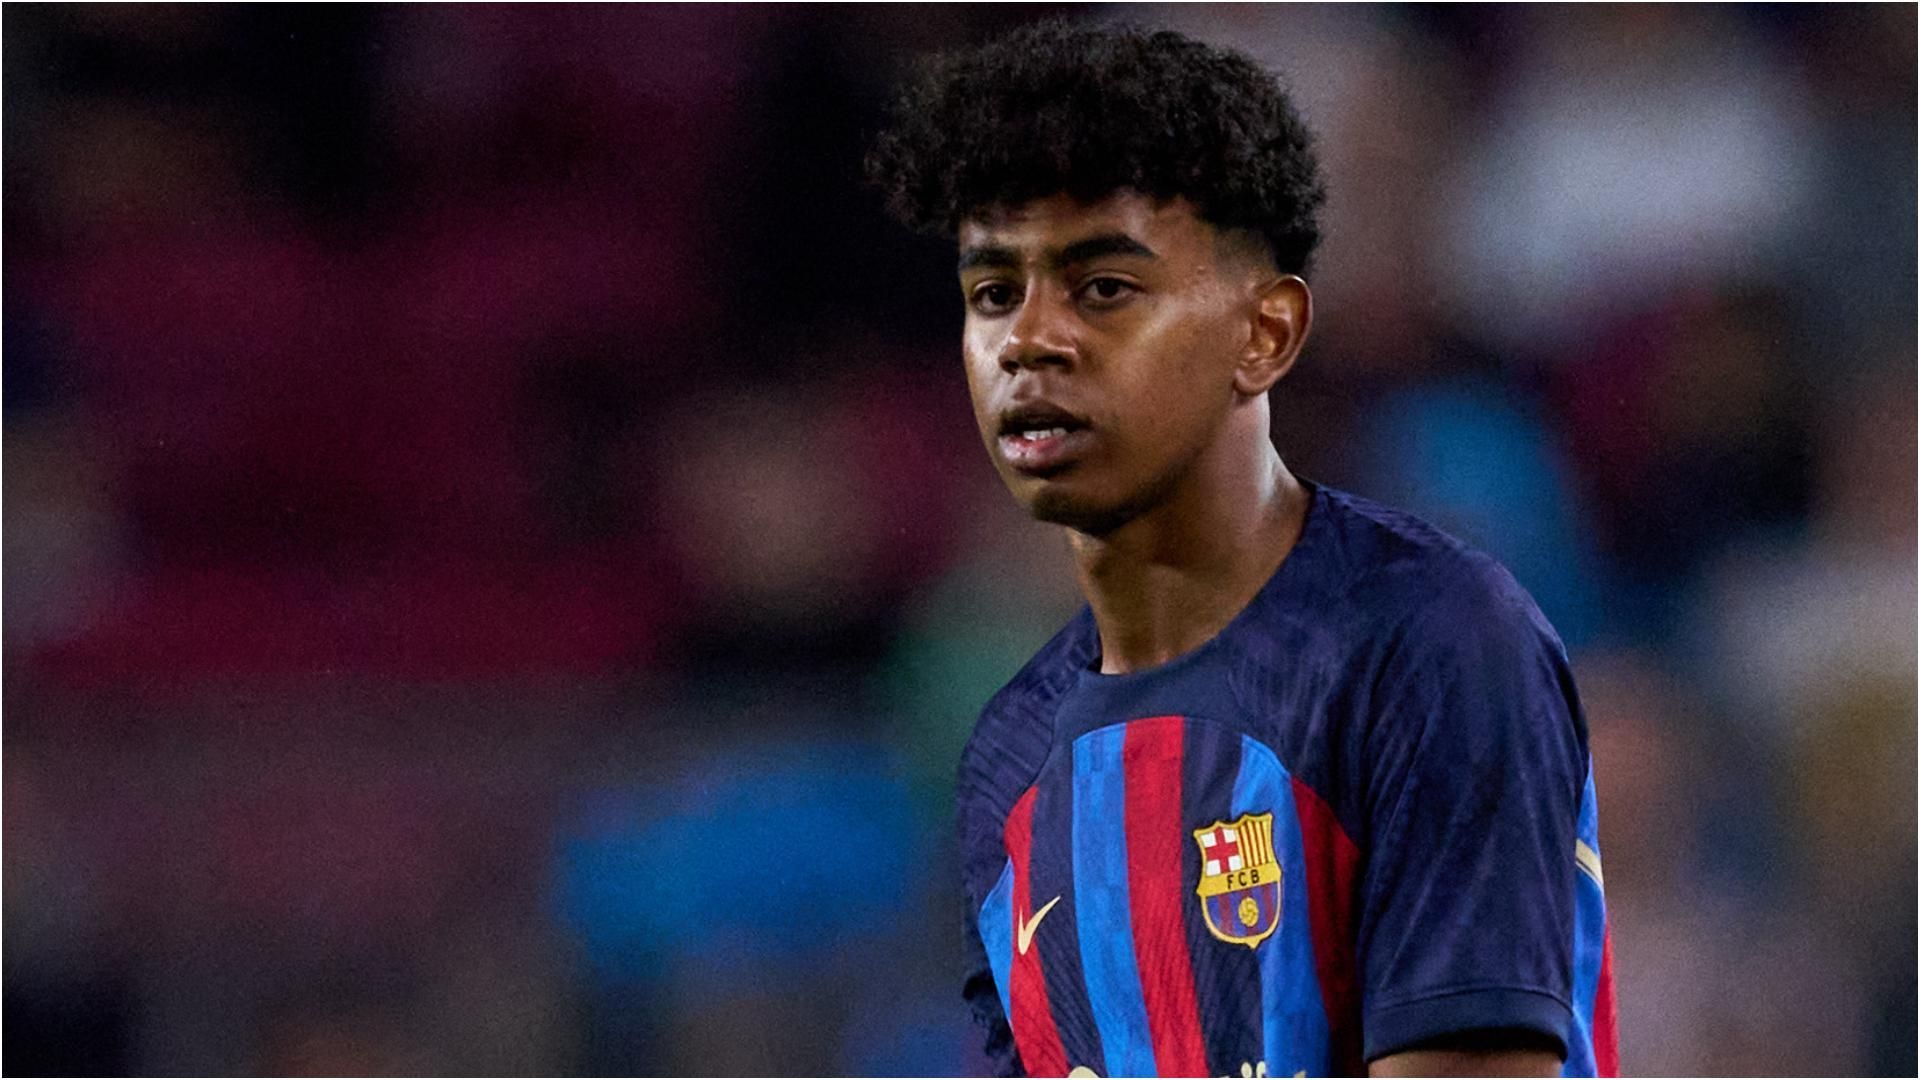 Lamine Yamal becomes Barcelona's youngest player ever - ESPN Video